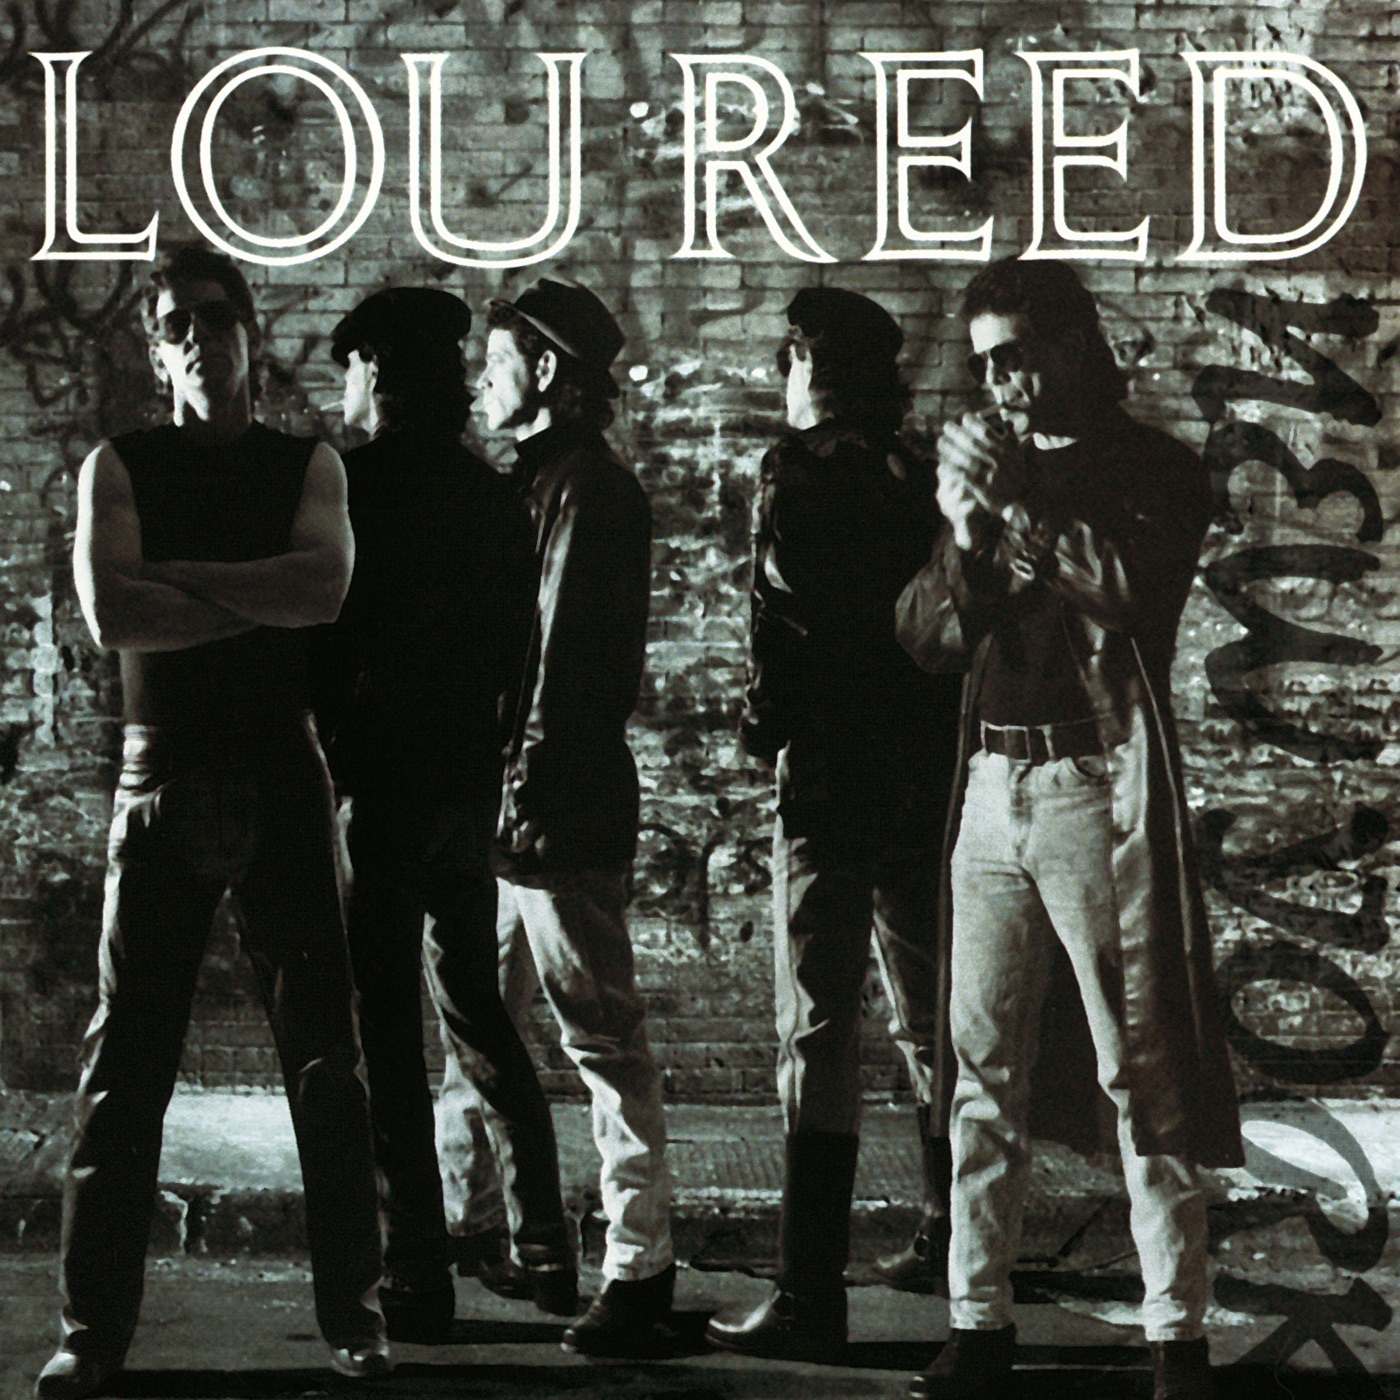 New York by Lou Reed